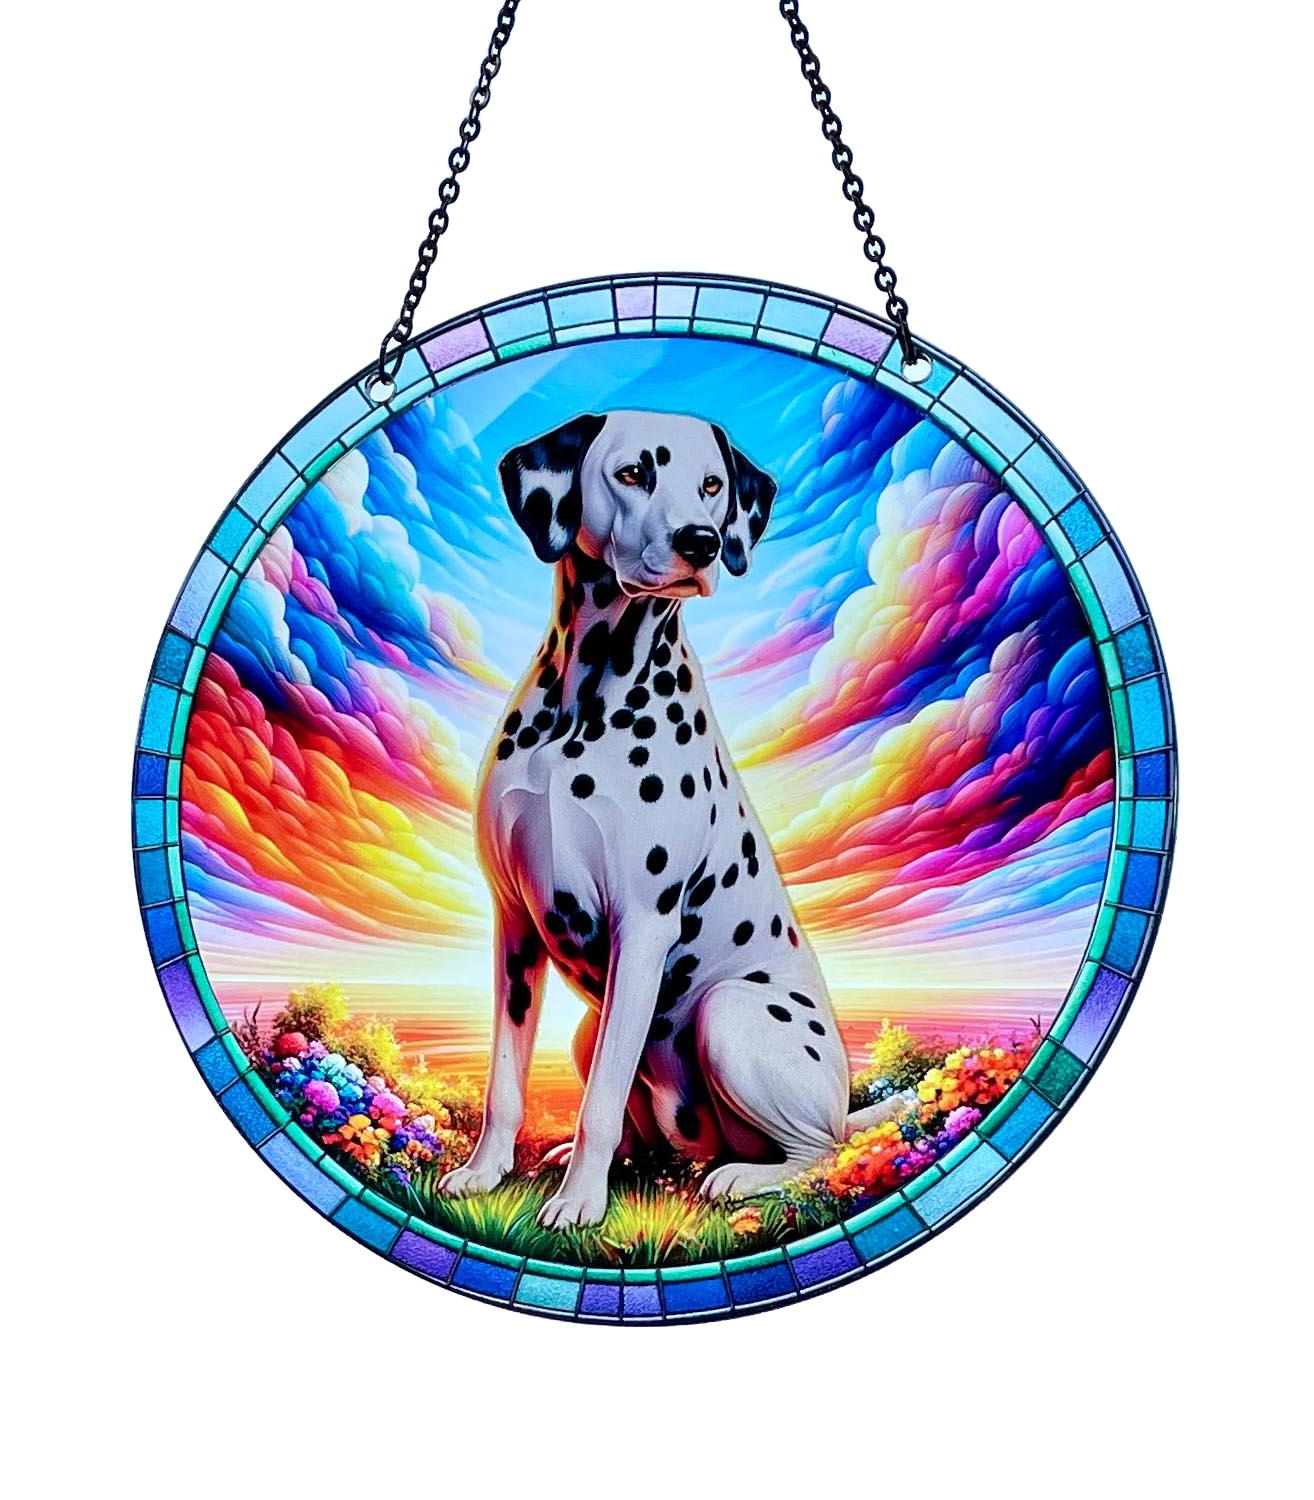 Dalmation Acrylic Suncatcher with Chain #SC375 by d'ears, 6 inch, made in the USA, Dog gift